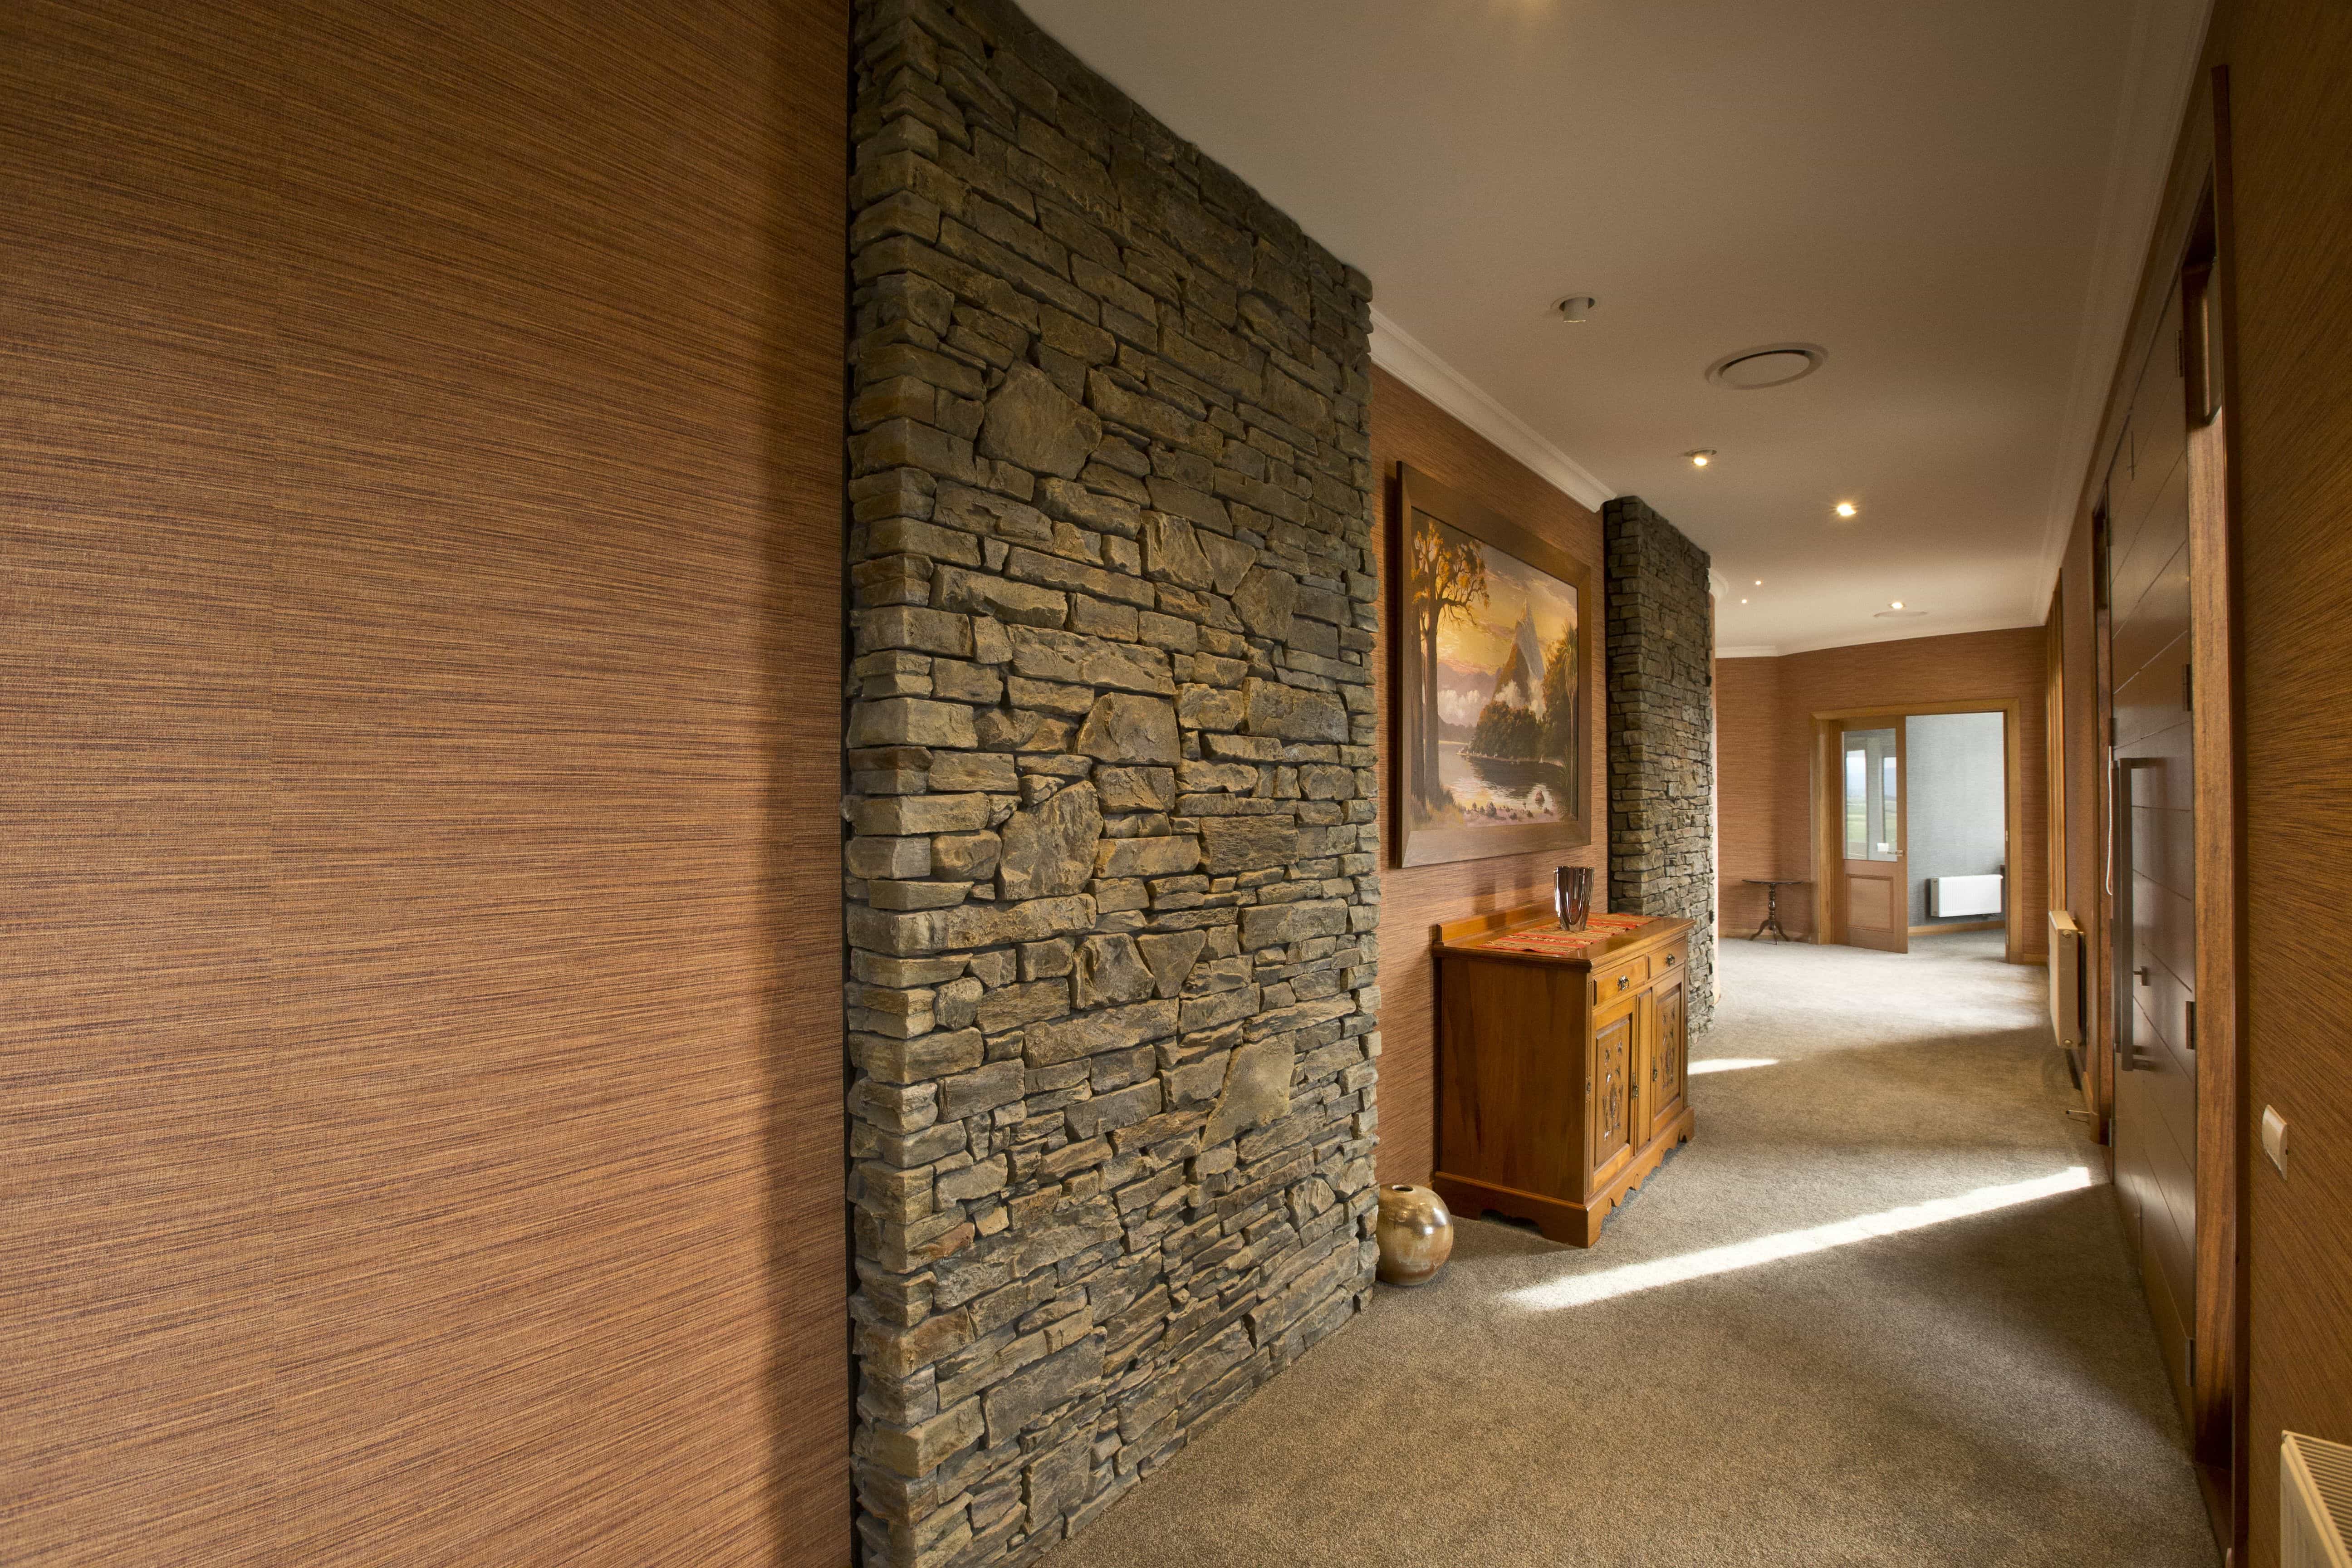  Texture is the key here with the stone work and wallpaper blending together